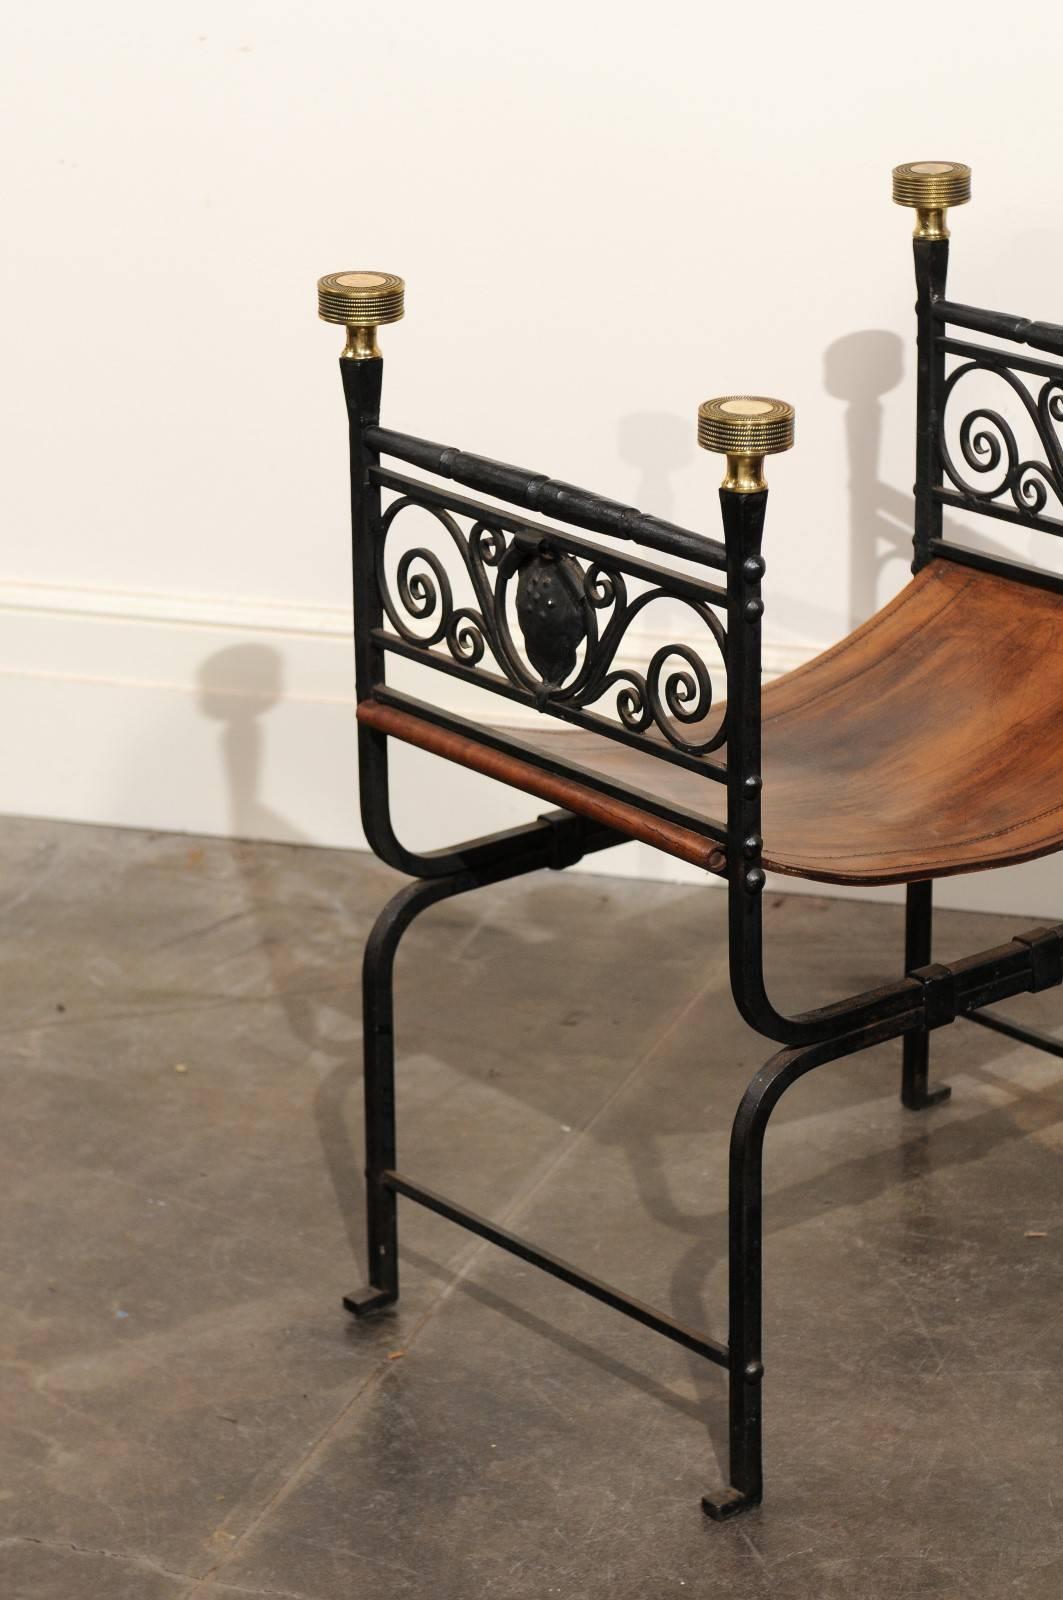 20th Century English Campaign Iron, Brass and Leather Stool from the Turn of the Century